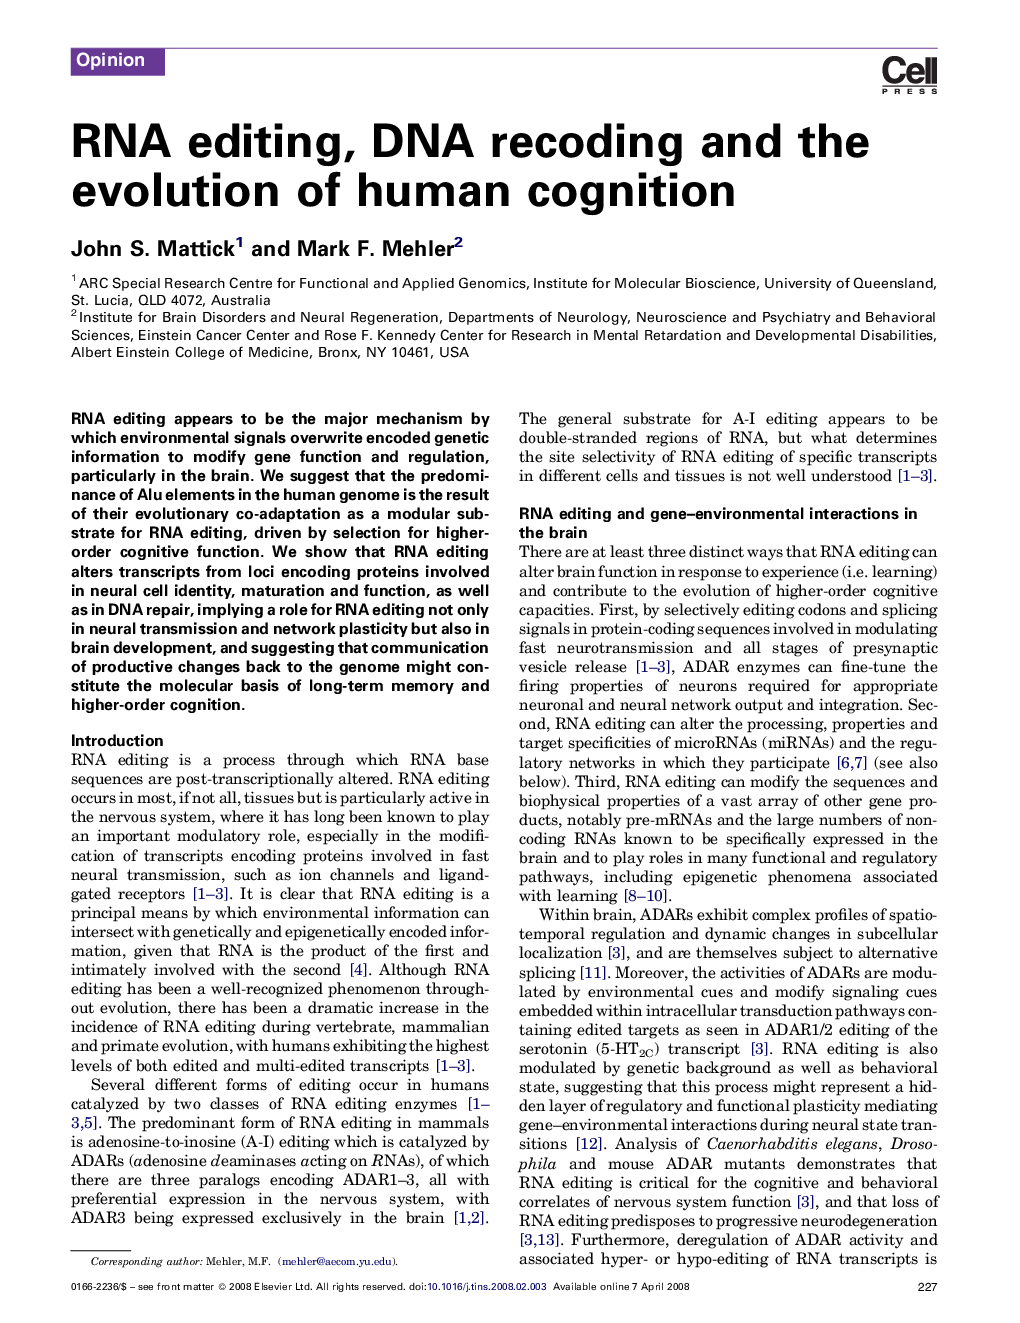 RNA editing, DNA recoding and the evolution of human cognition